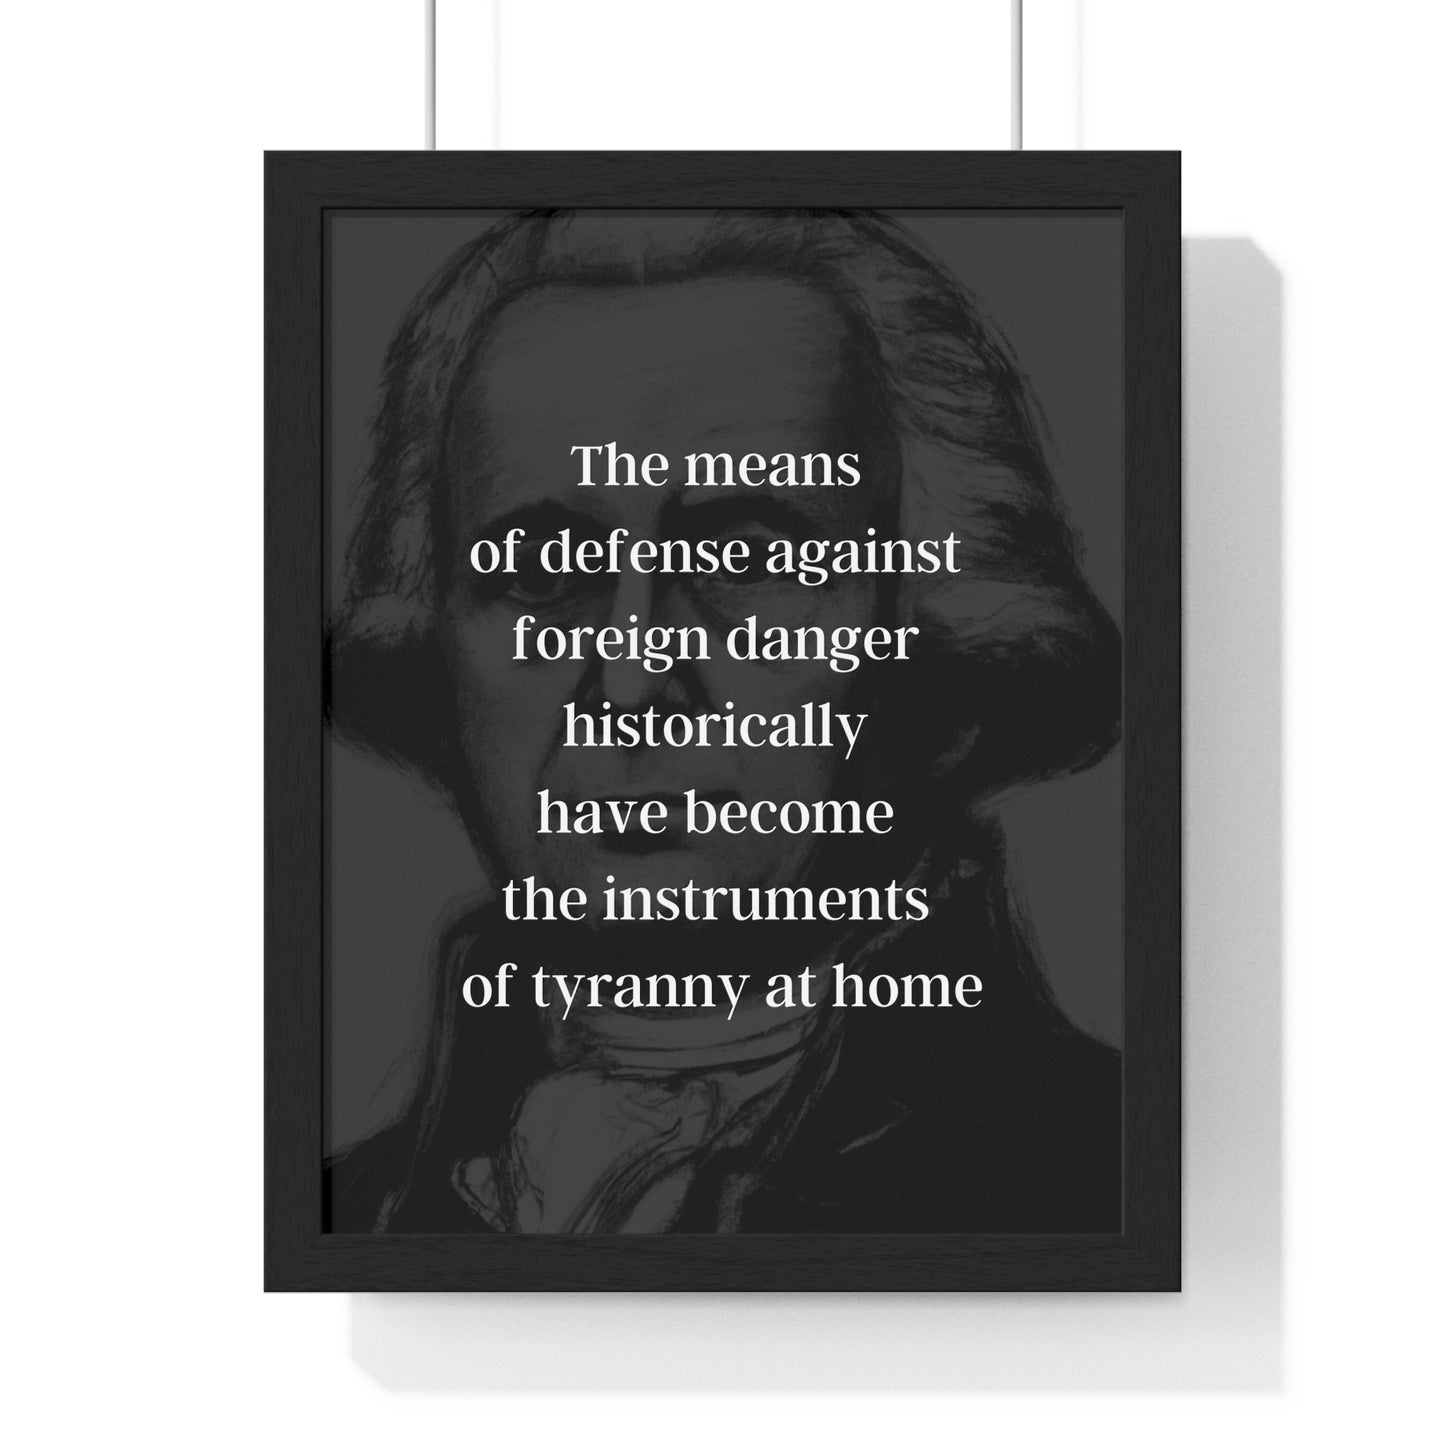 James Madison Quote 2, Poster Art, Dark Print, 4th President of the United States, American Patriots, AI Art, Political Art, Poster Prints, Presidential Portraits, Presidential Quotes, Inspirational Quotes